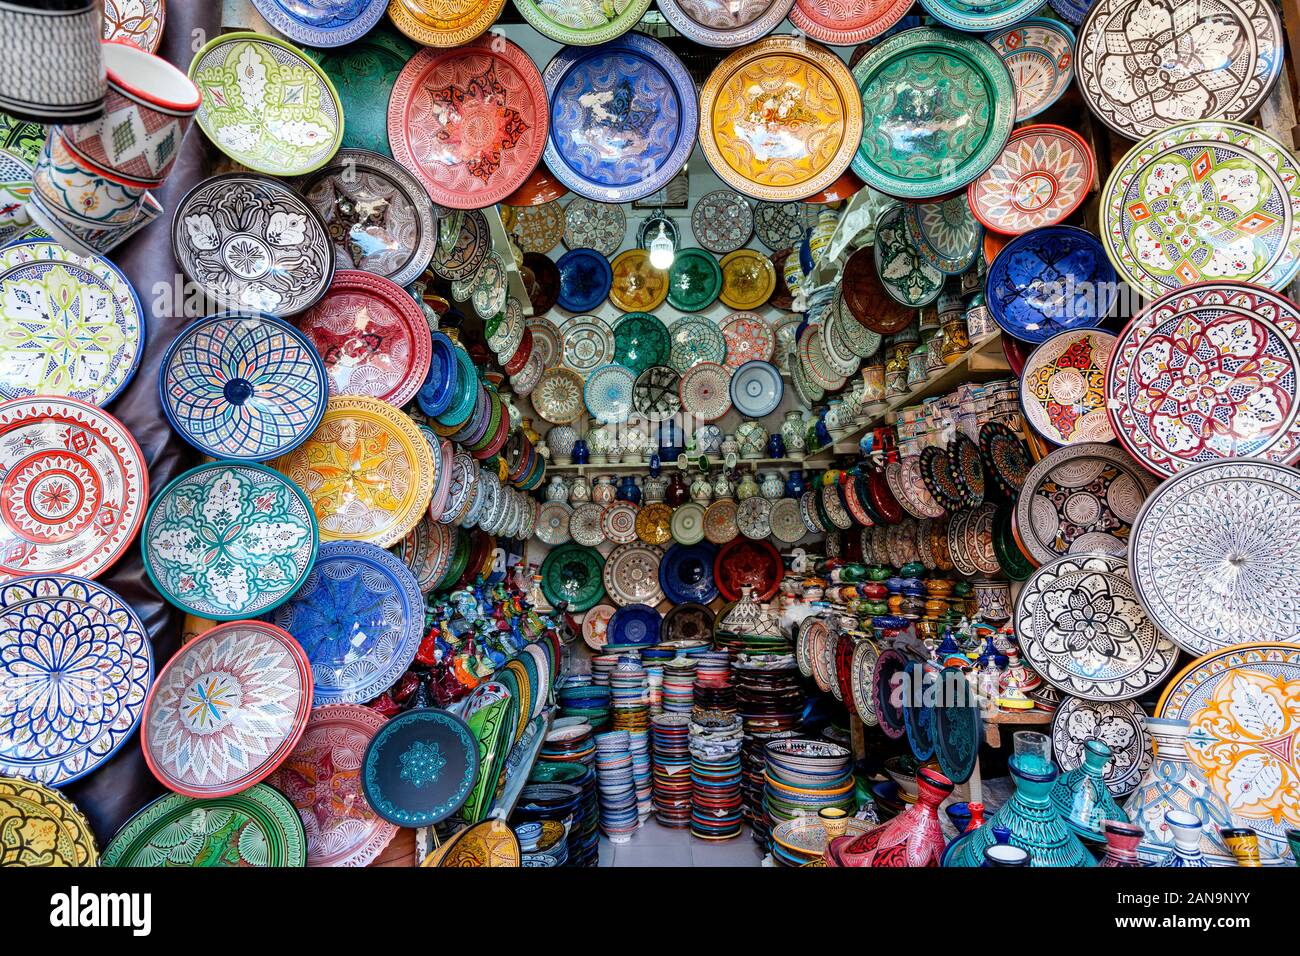 Colorful ceramic bowls sold in old town of Marrakech, Morocco, Africa Stock Photo